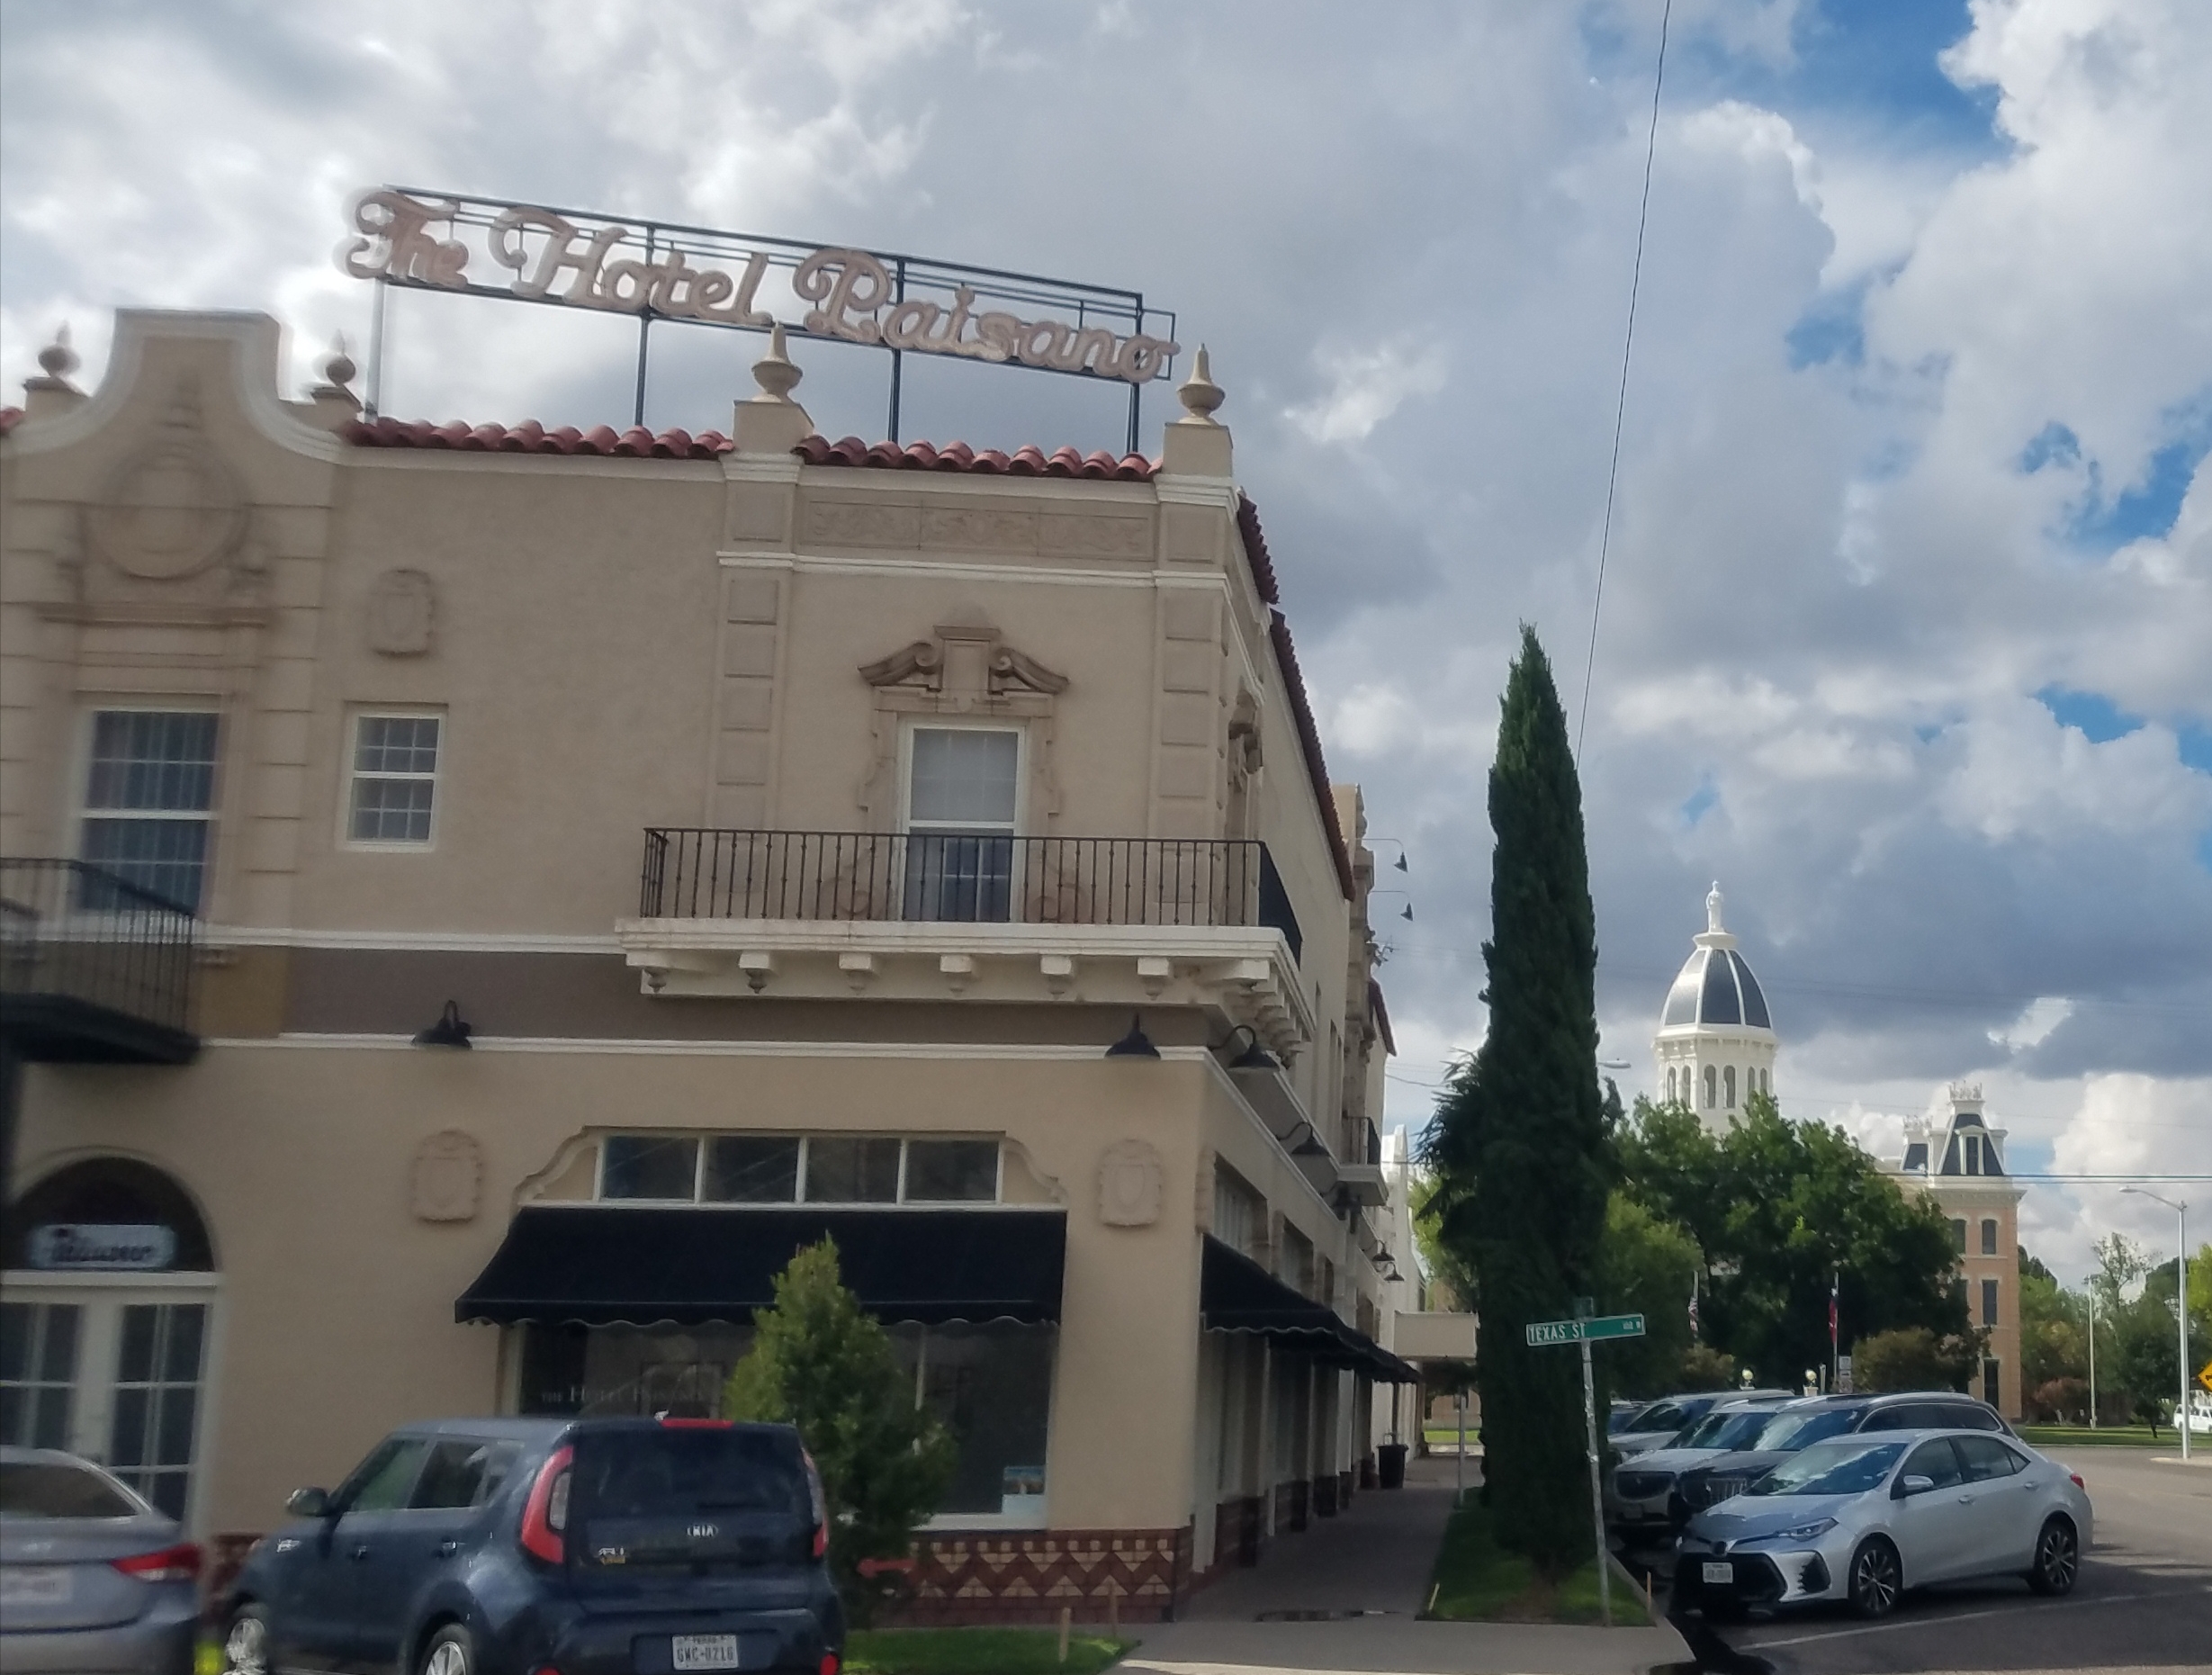 Marfa, Texas. The Hotel Paisano, where cast and crew stayed during the filming of "Giant" in 1956. I thought Elizabeth Taylor stayed here, too, but just learned she had a private home in Marfa. 